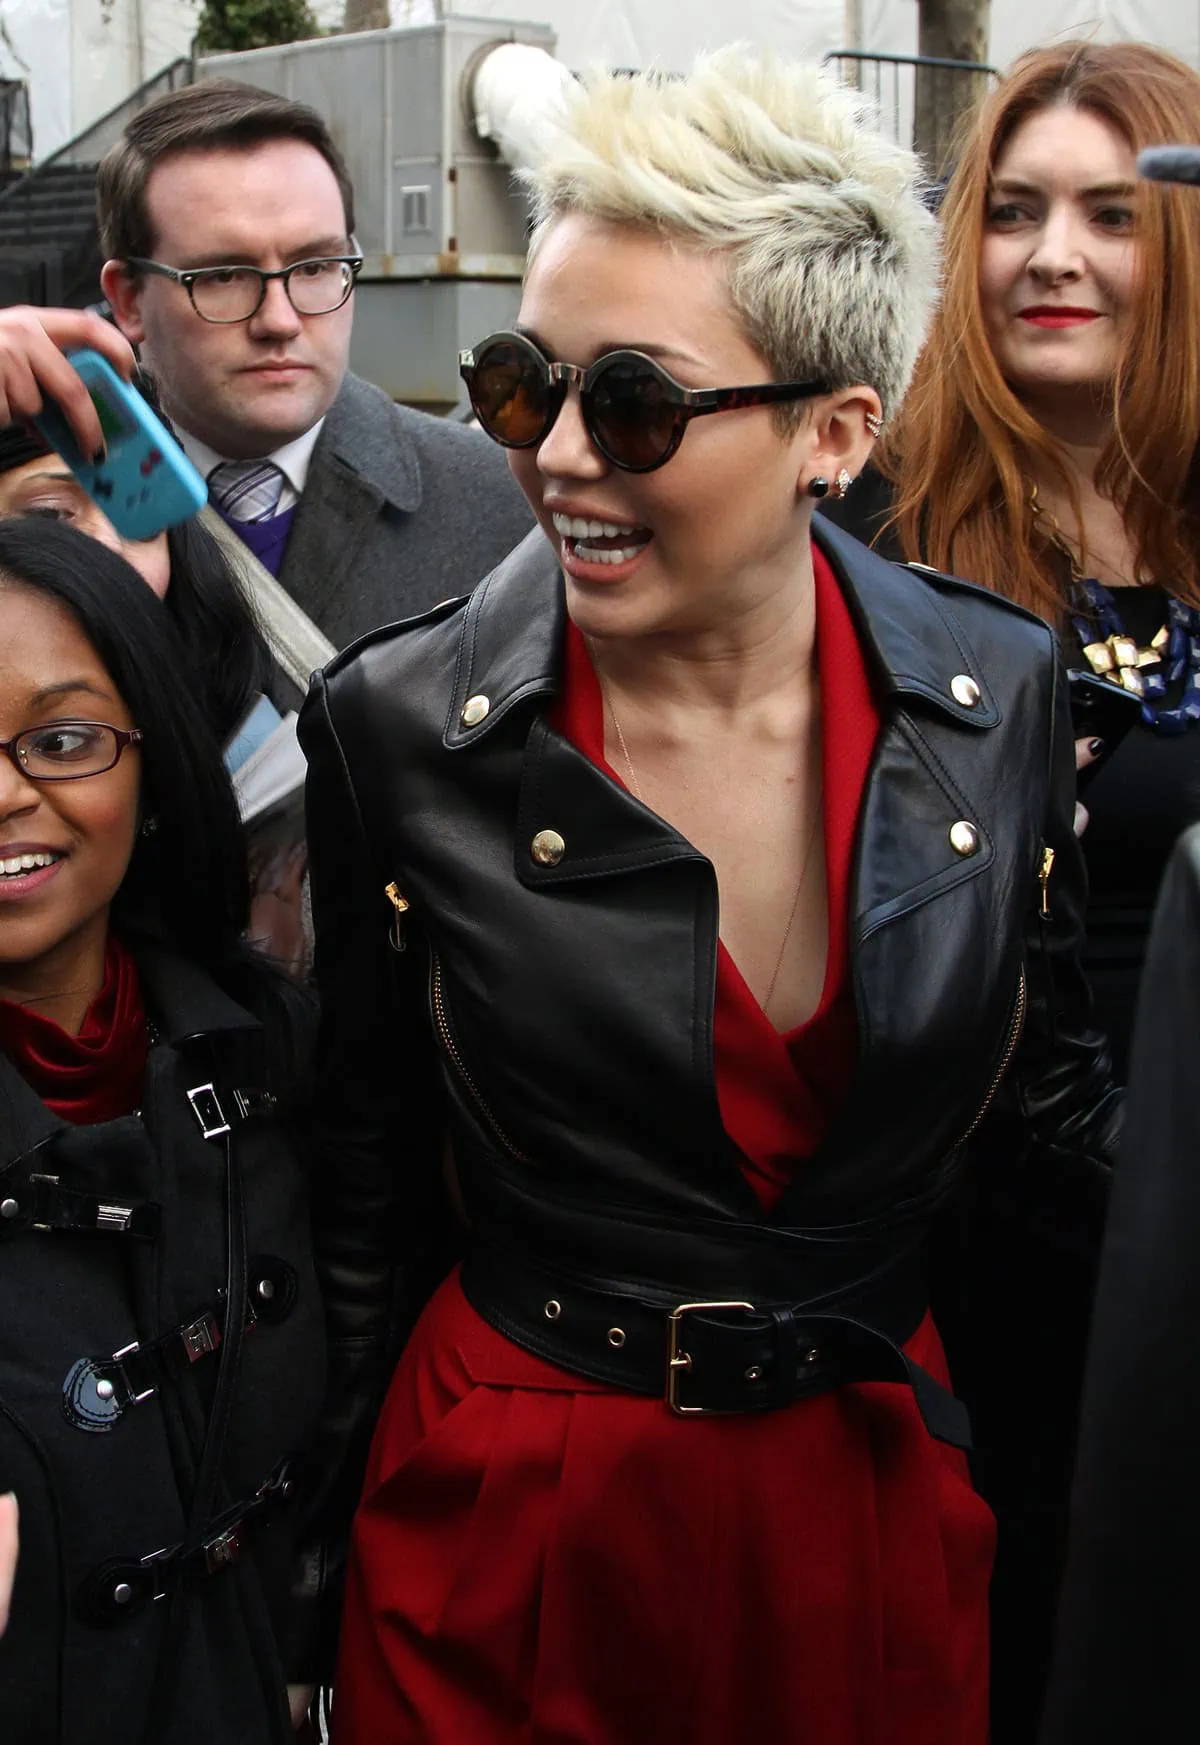 Miley Cyrus rocks a bold look in a red belted jumpsuit paired with a chic black leather jacket